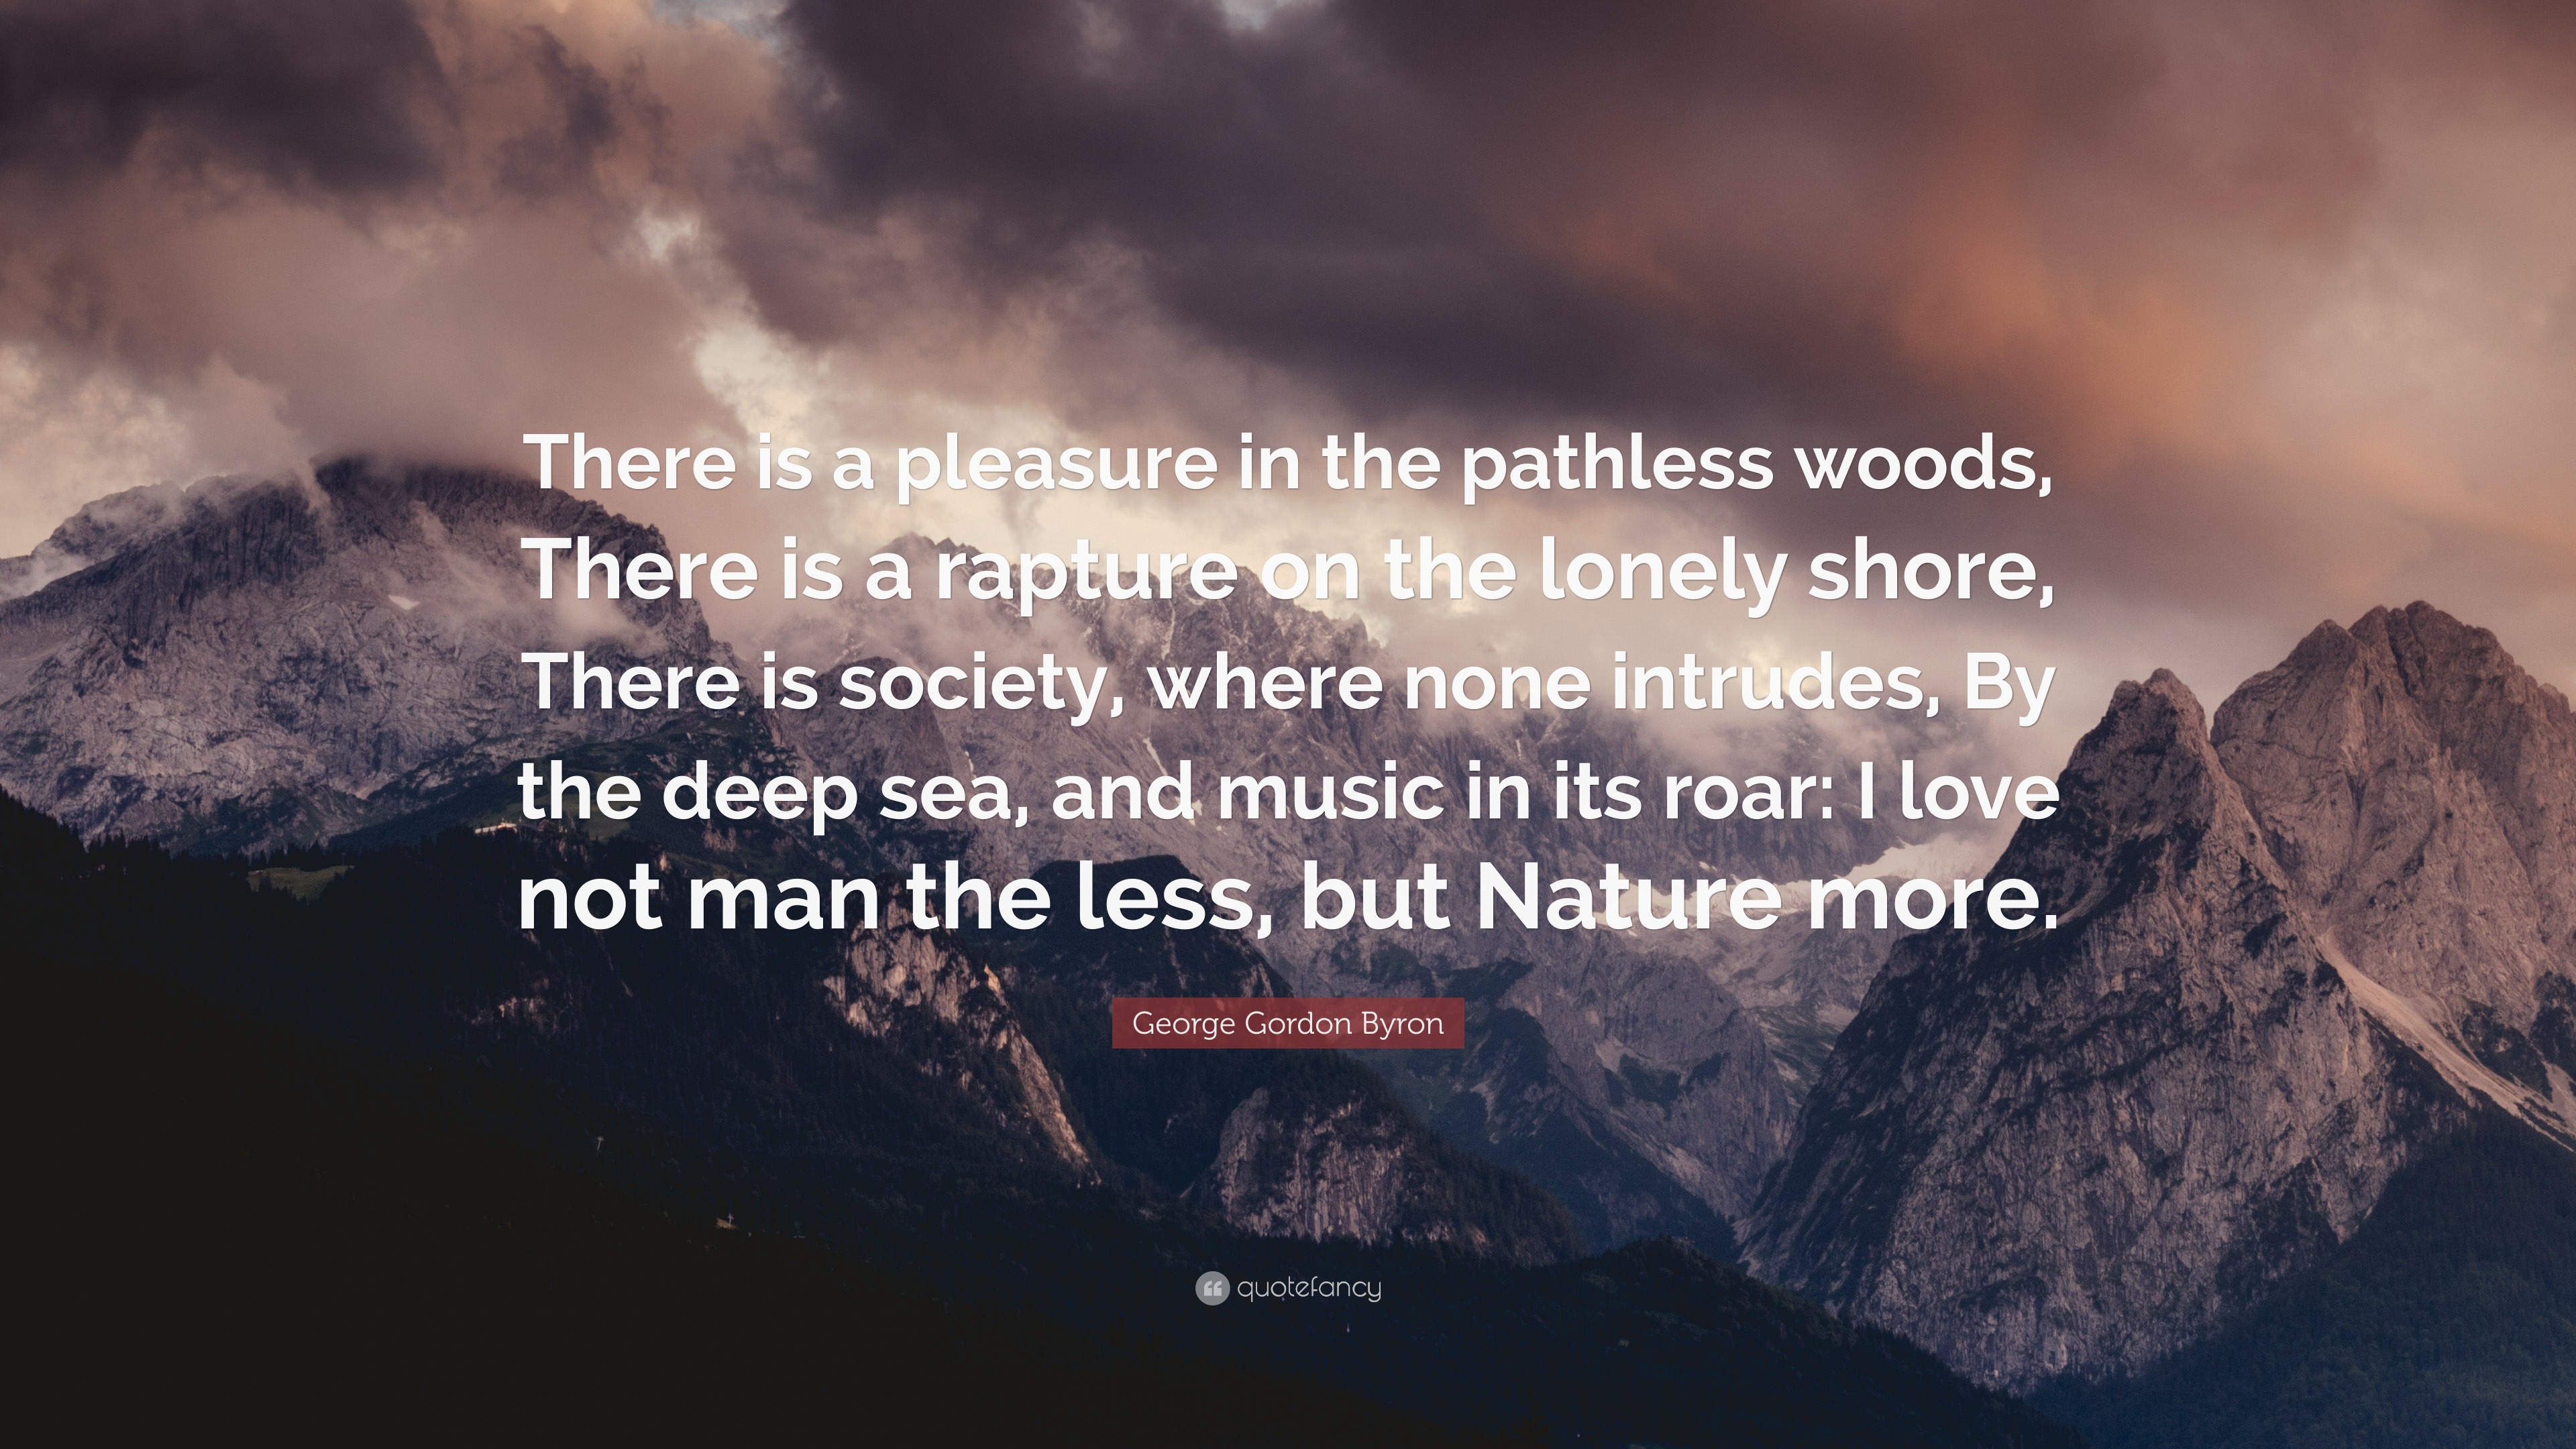 life is too much like a pathless wood